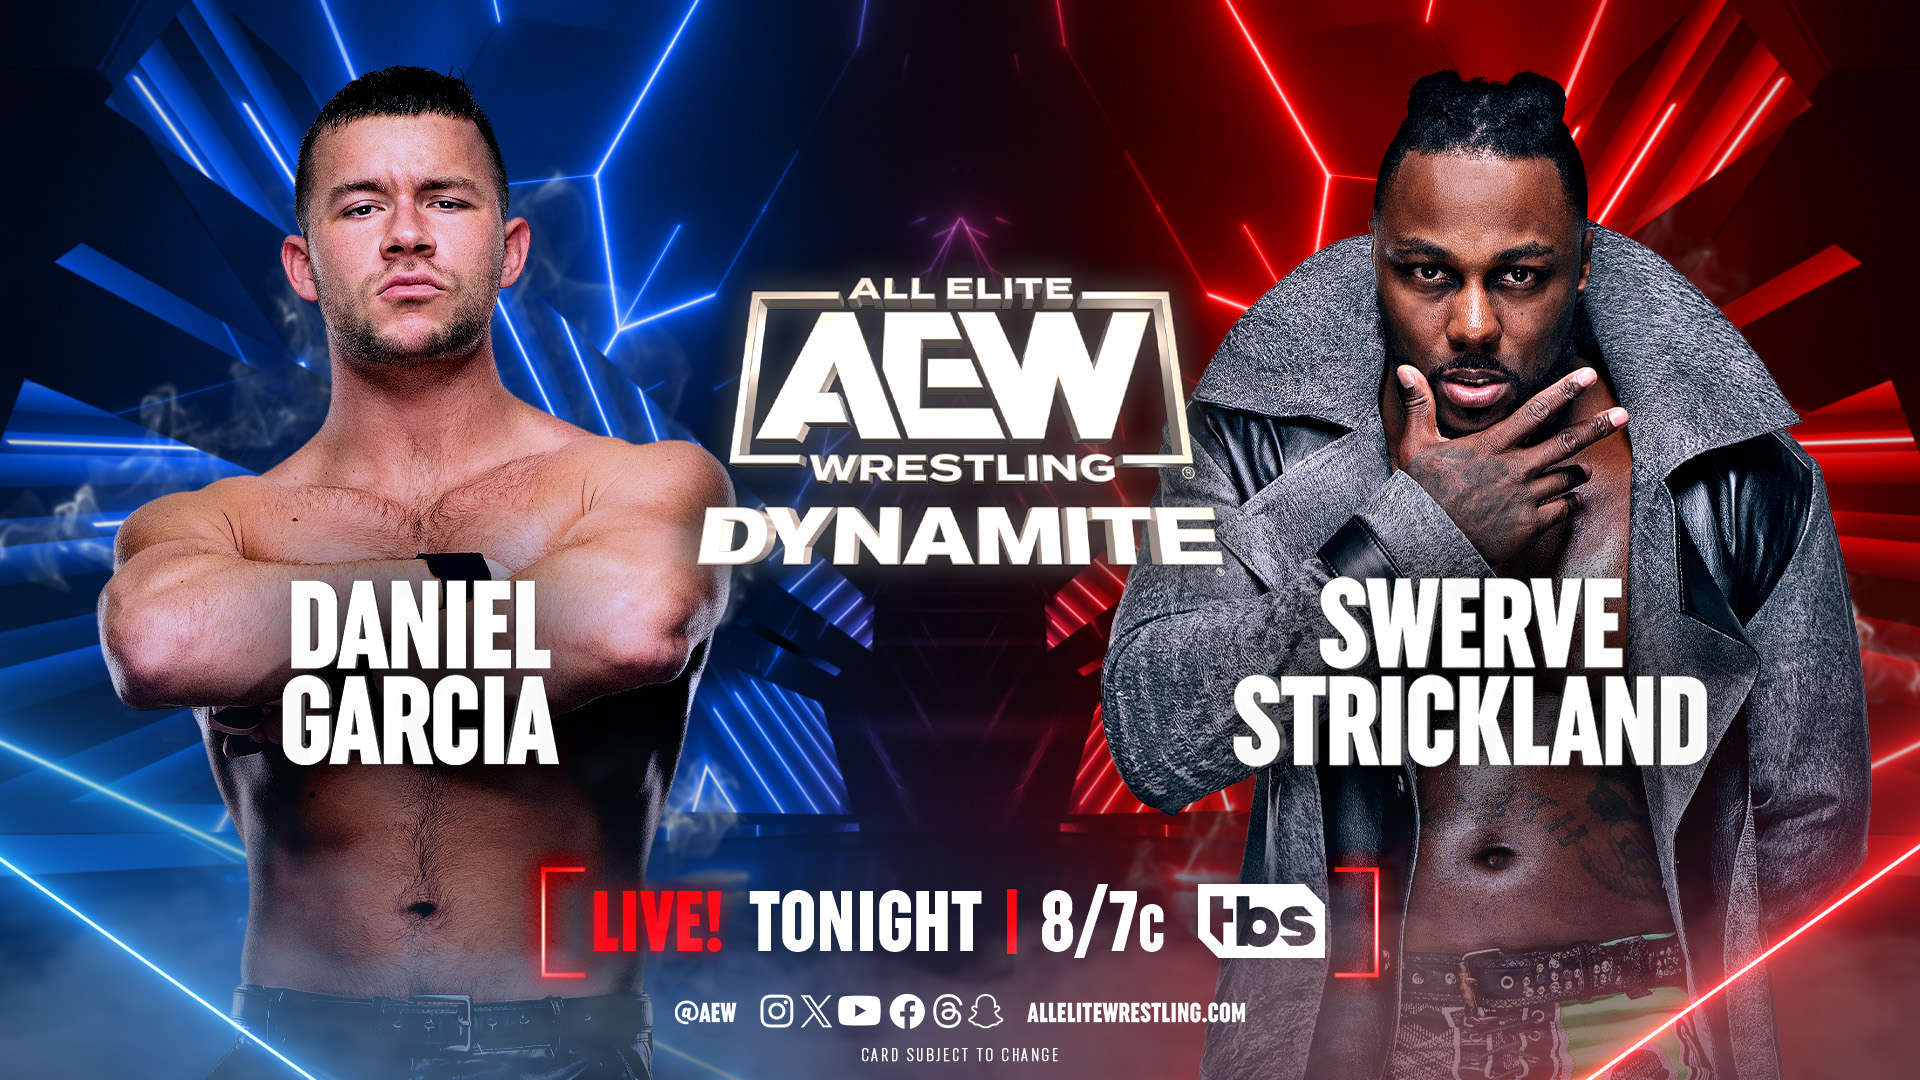 AEW Dynamite Quick Review